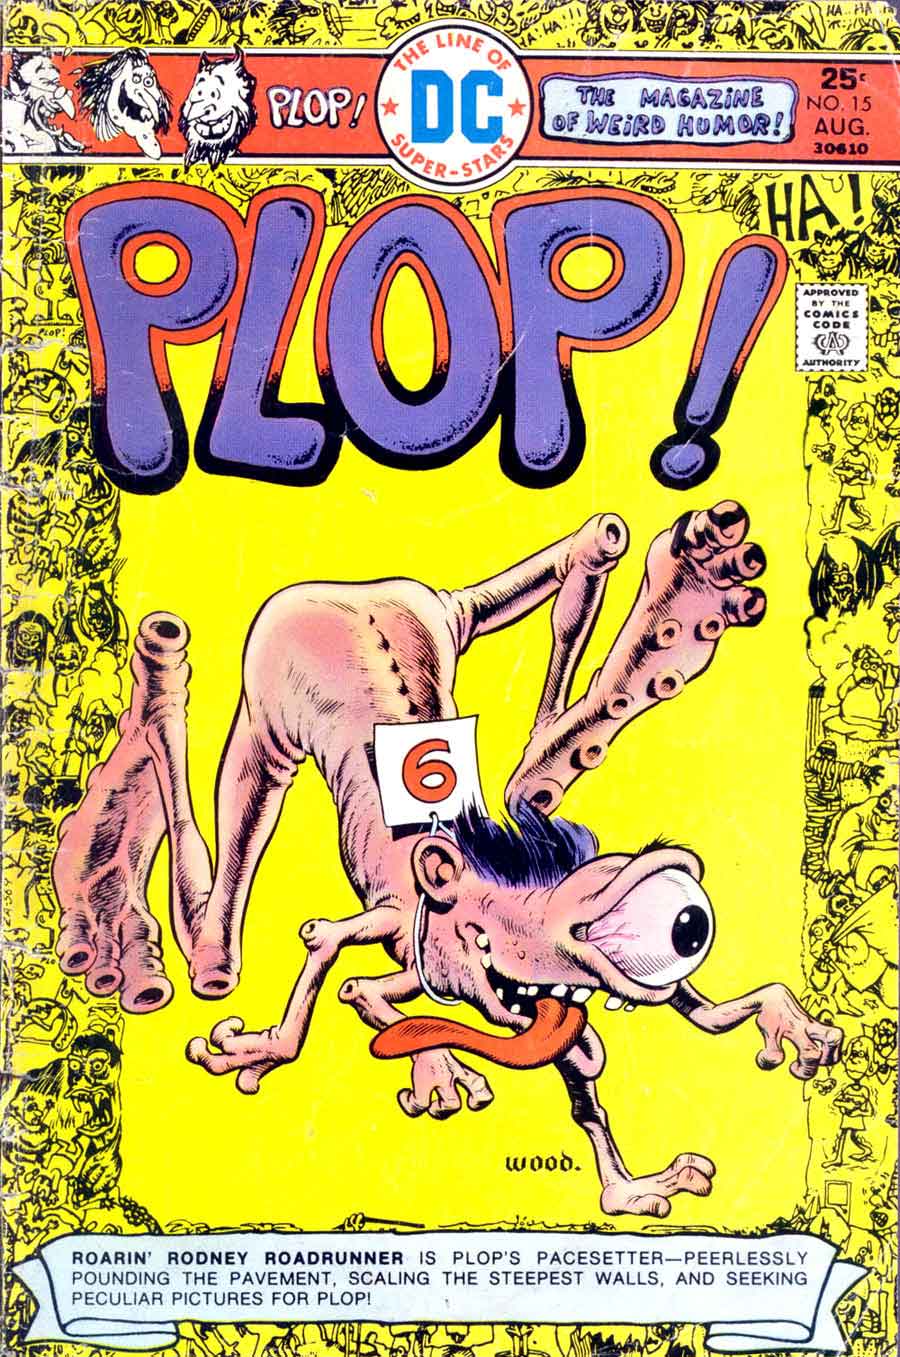 Plop v1 #15 dc 1970s bronze age comic book cover art by Wally Wood